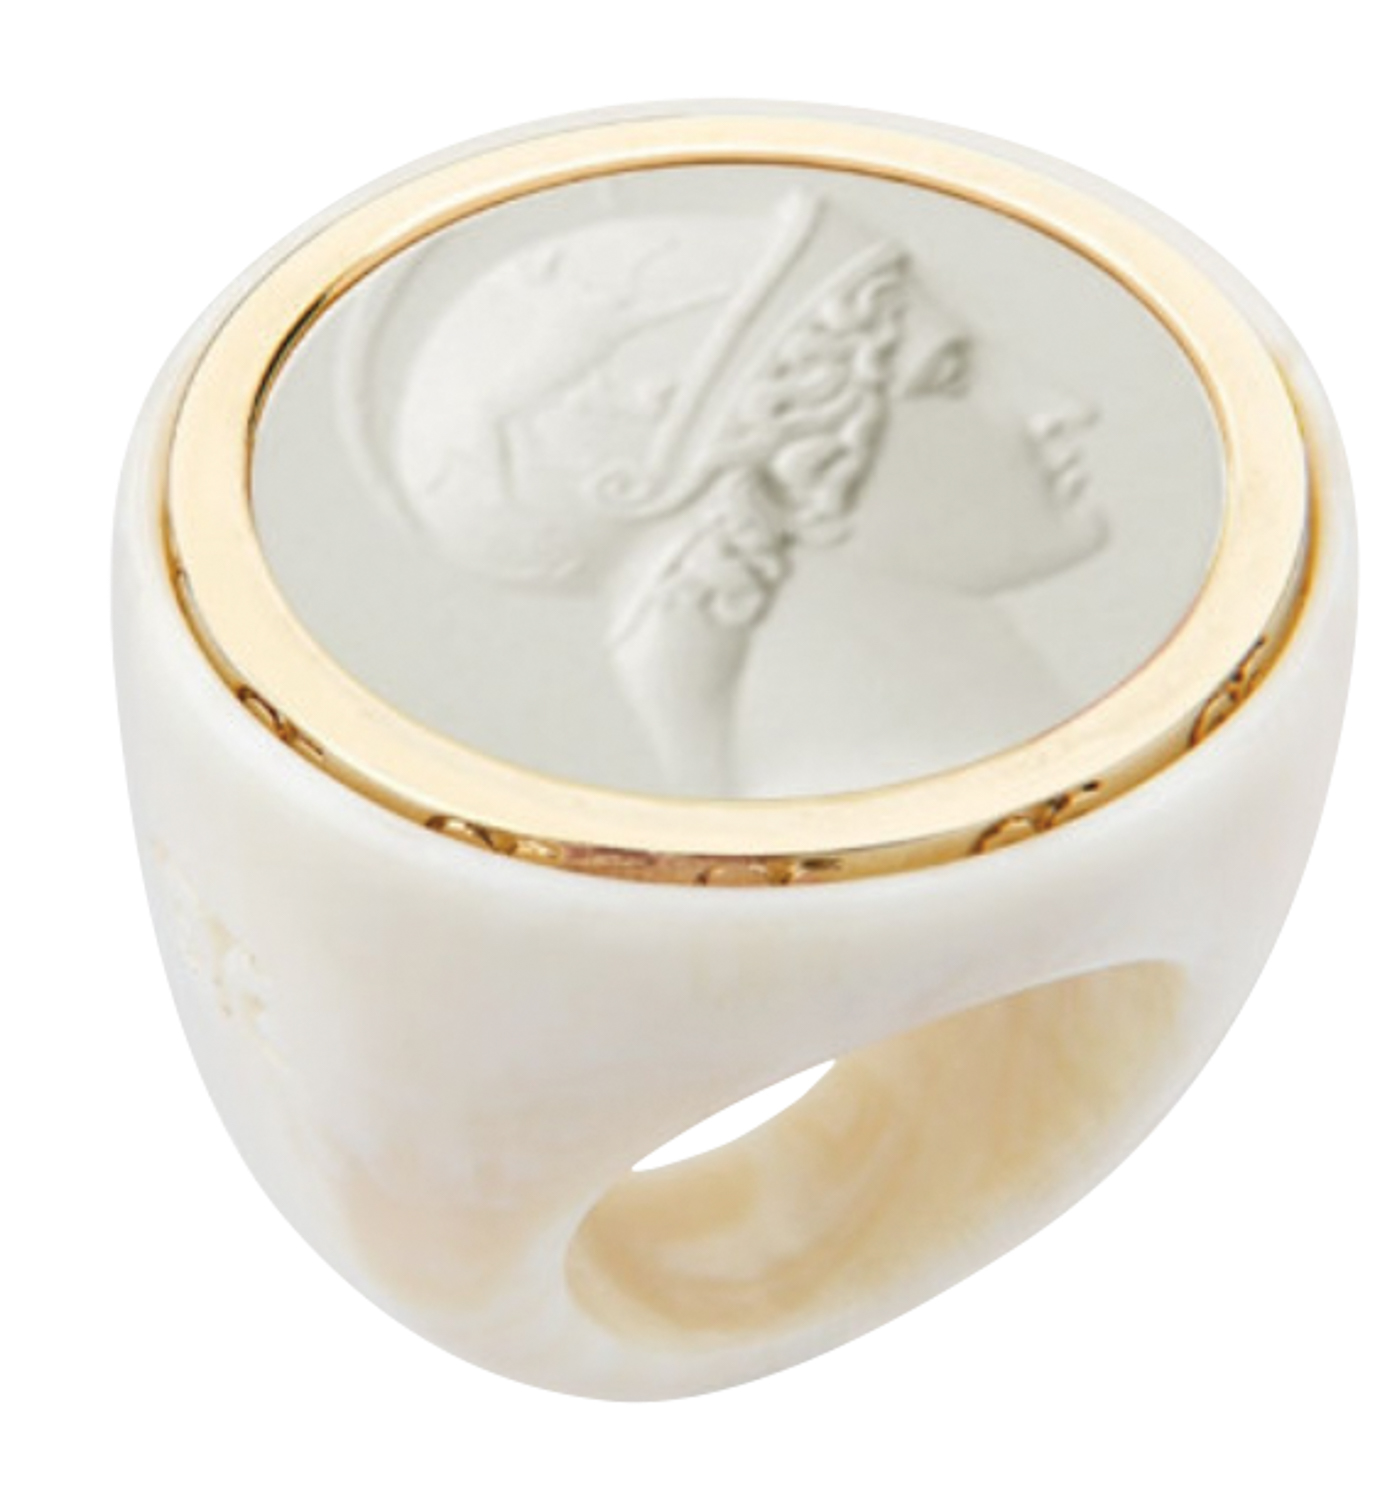 white ring with Roman face encircled in gold